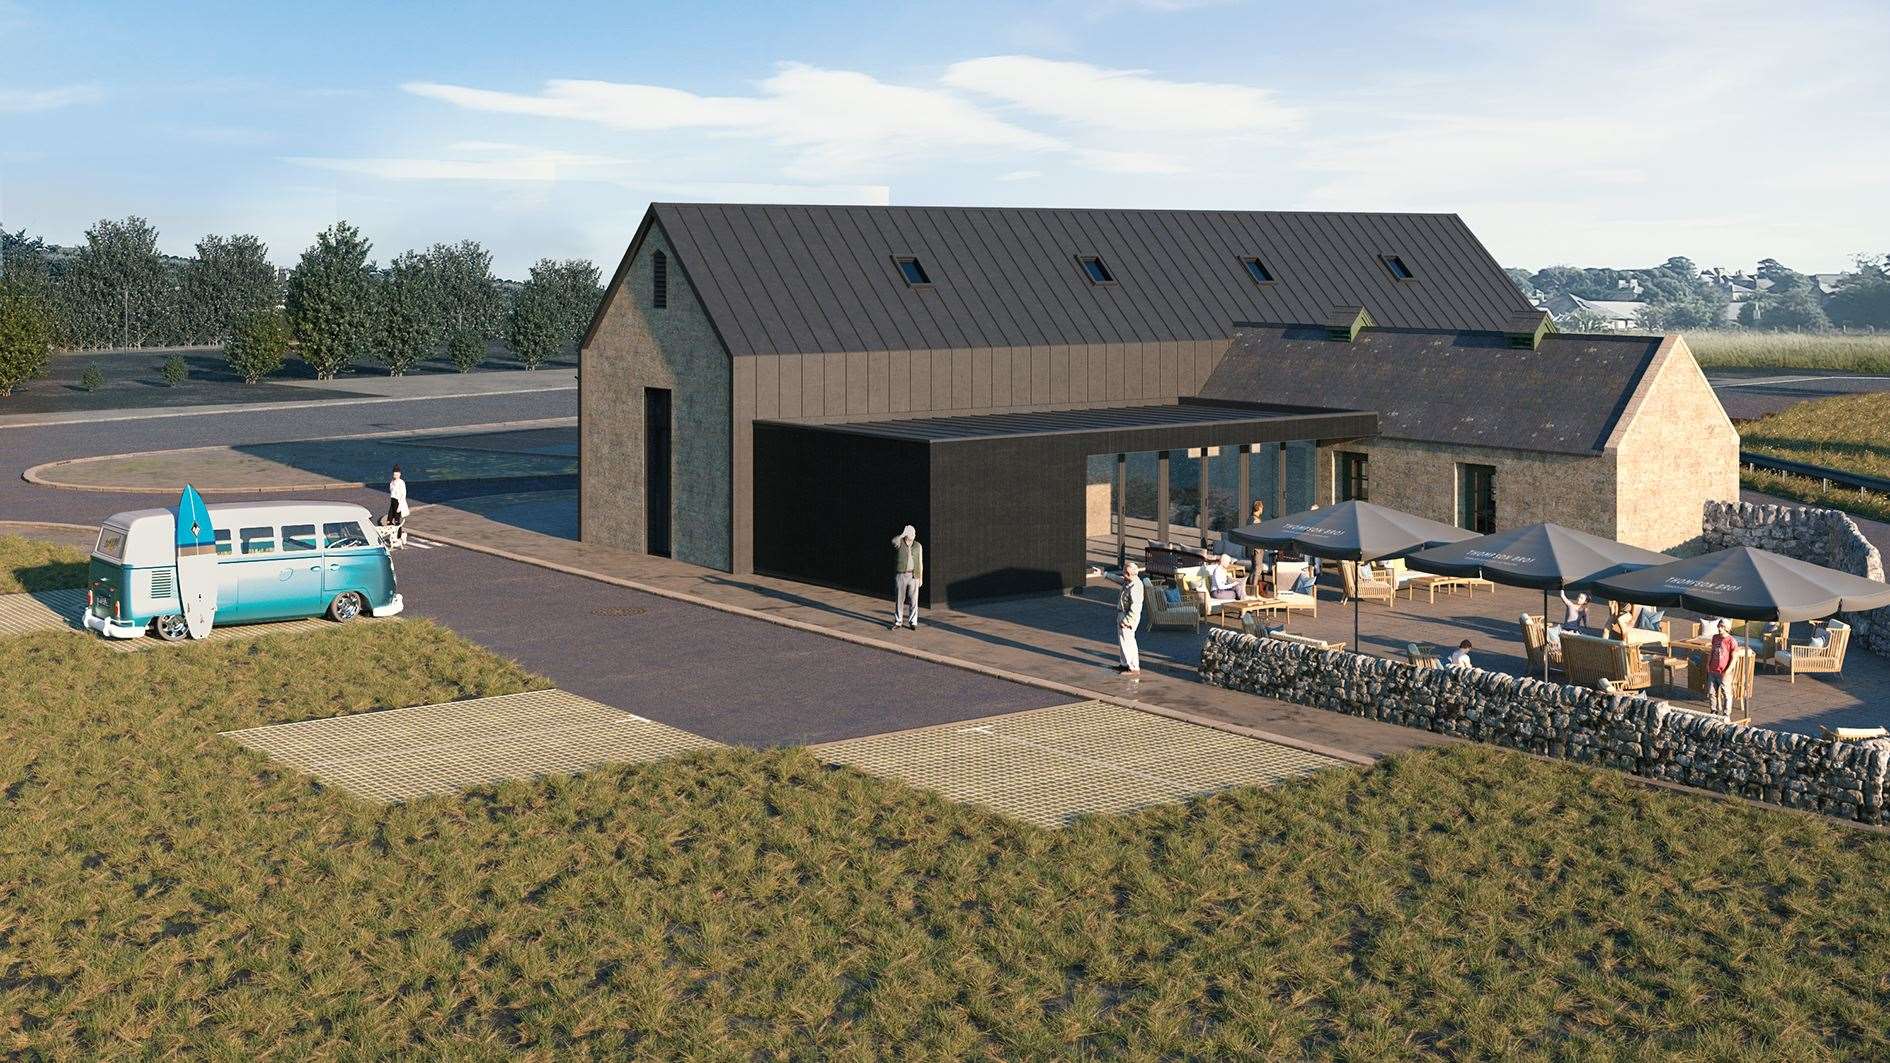 It is intended to turn Dornoch's historic old gasworks into a visitor centre with tasting bar and shop.